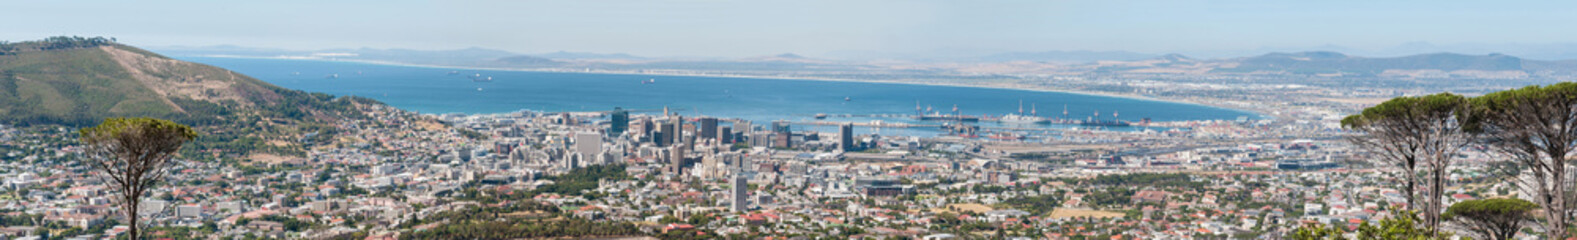 Panorama of Cape Town city center and harbor